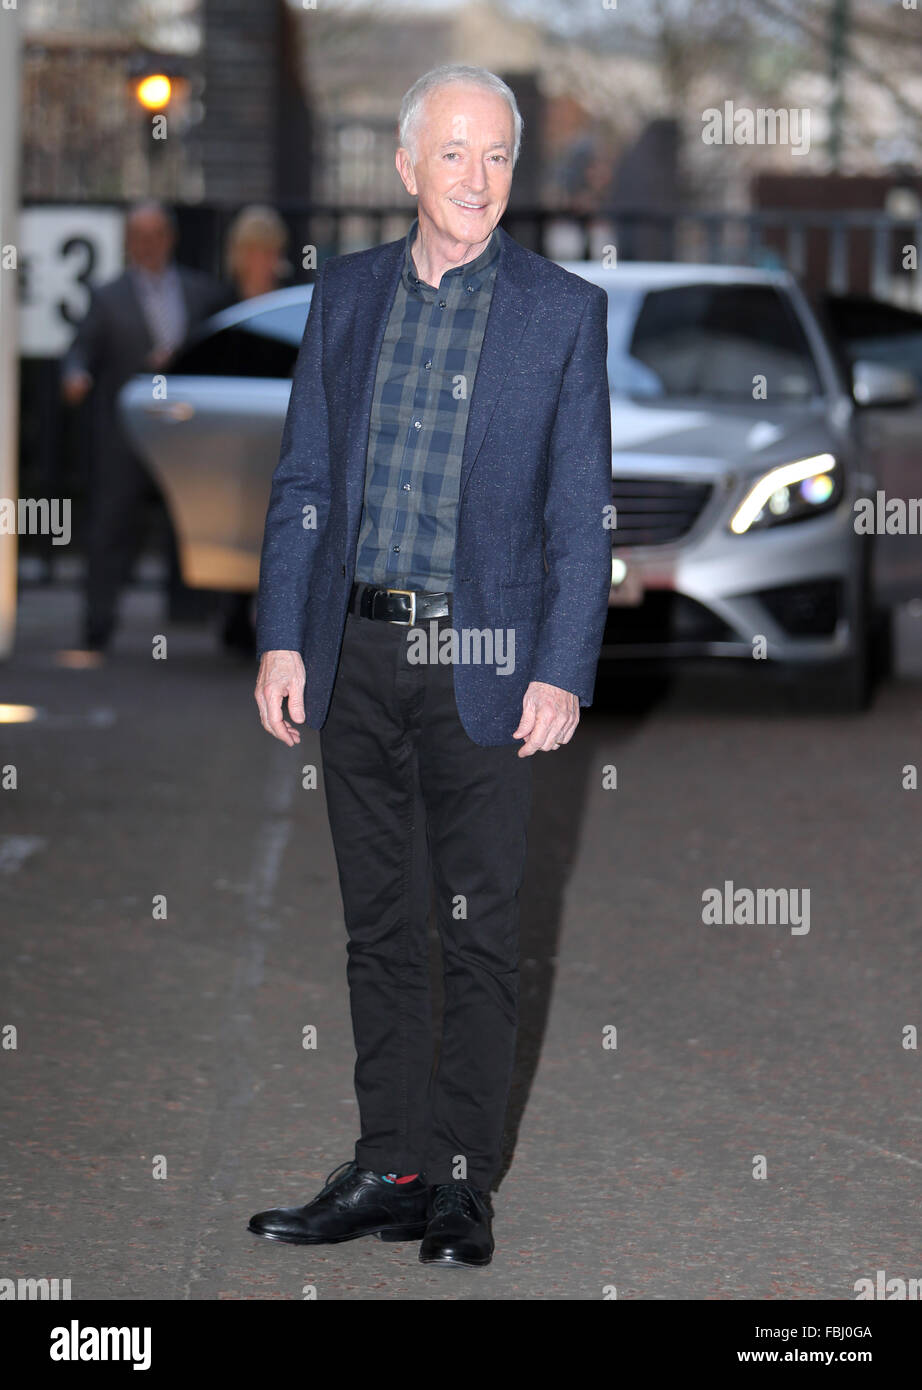 Anthony Daniels outside ITV Studios  Featuring: Anthony Daniels Where: London, United Kingdom When: 17 Dec 2015 Stock Photo